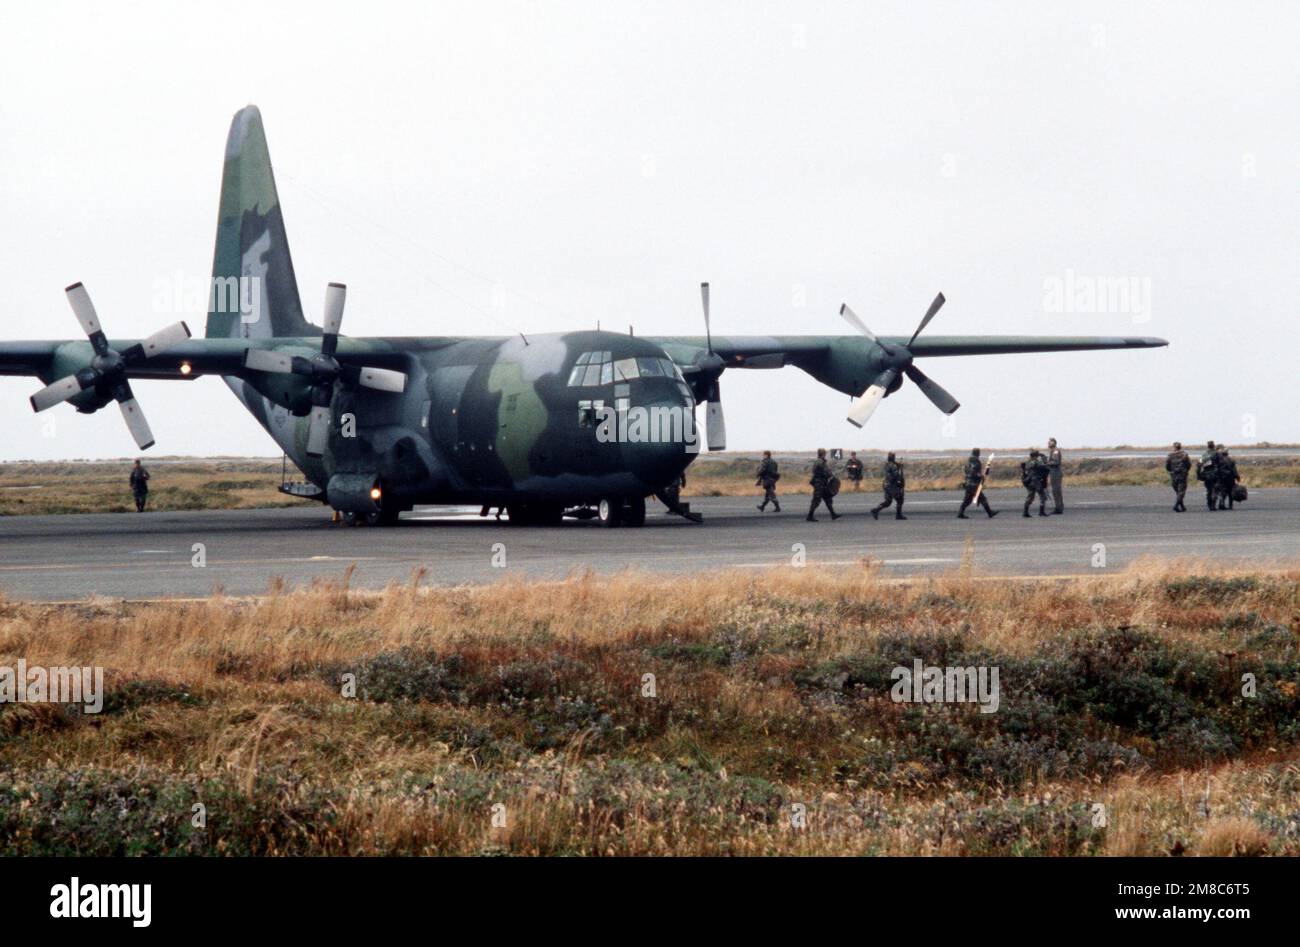 Members of Co. C, 2nd Bn., 297th Infantry Group (Scout), Alaska National Guard, disembark from an Air Force C-130 Hercules aircraft after arriving to take part in exercise Kernal Potlatch '89. Subject Operation/Series: KERNAL POTLATCH '89 Base: Amchitka Island State: Alaska (AK) Country: United States Of America (USA) Stock Photo